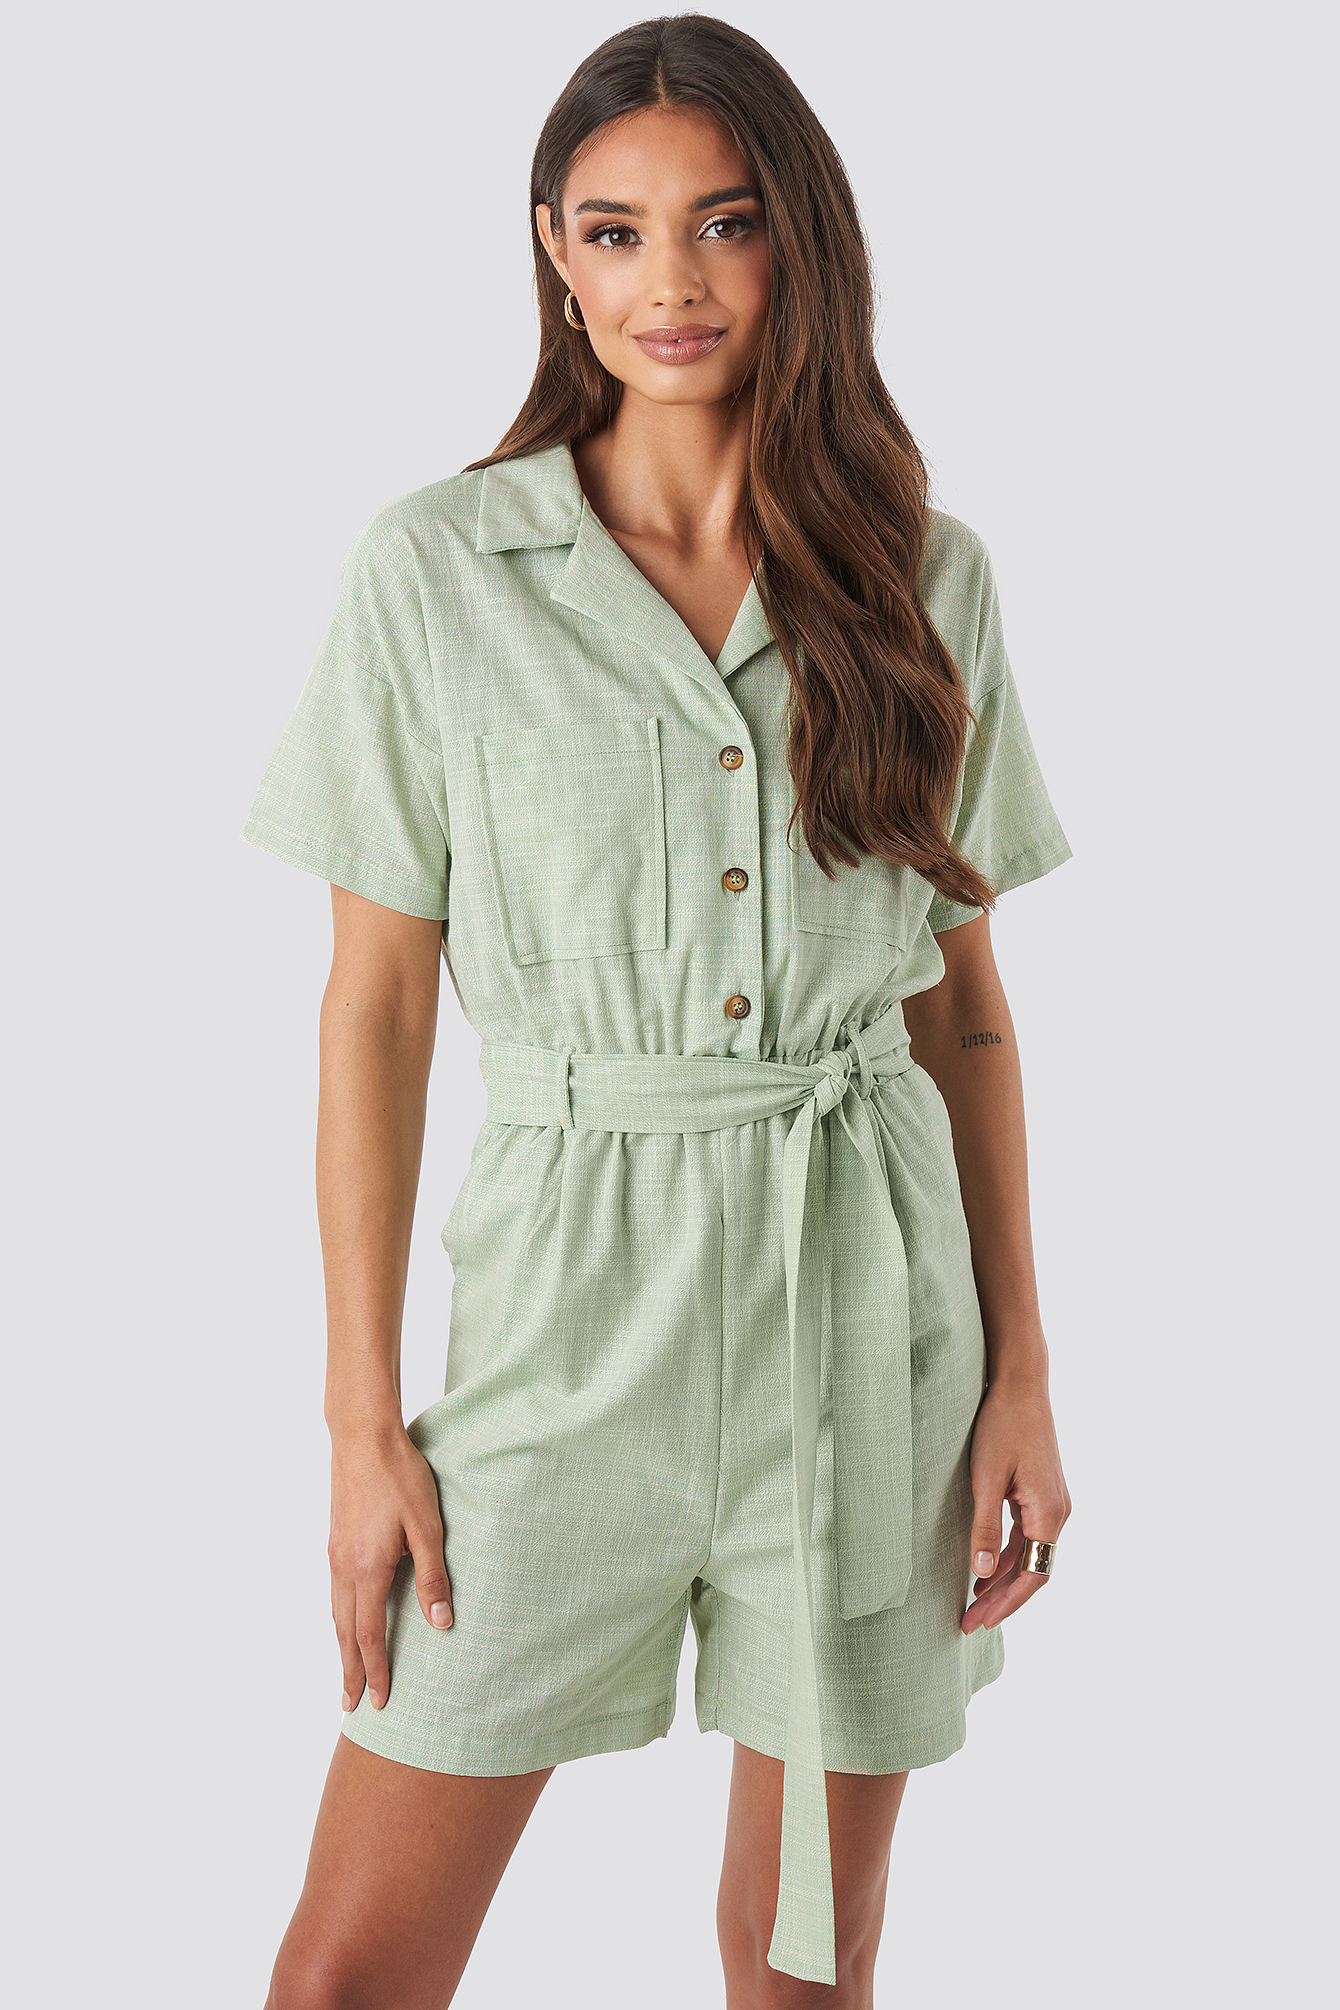 Mint Trendyol Waistband Belted Playsuit